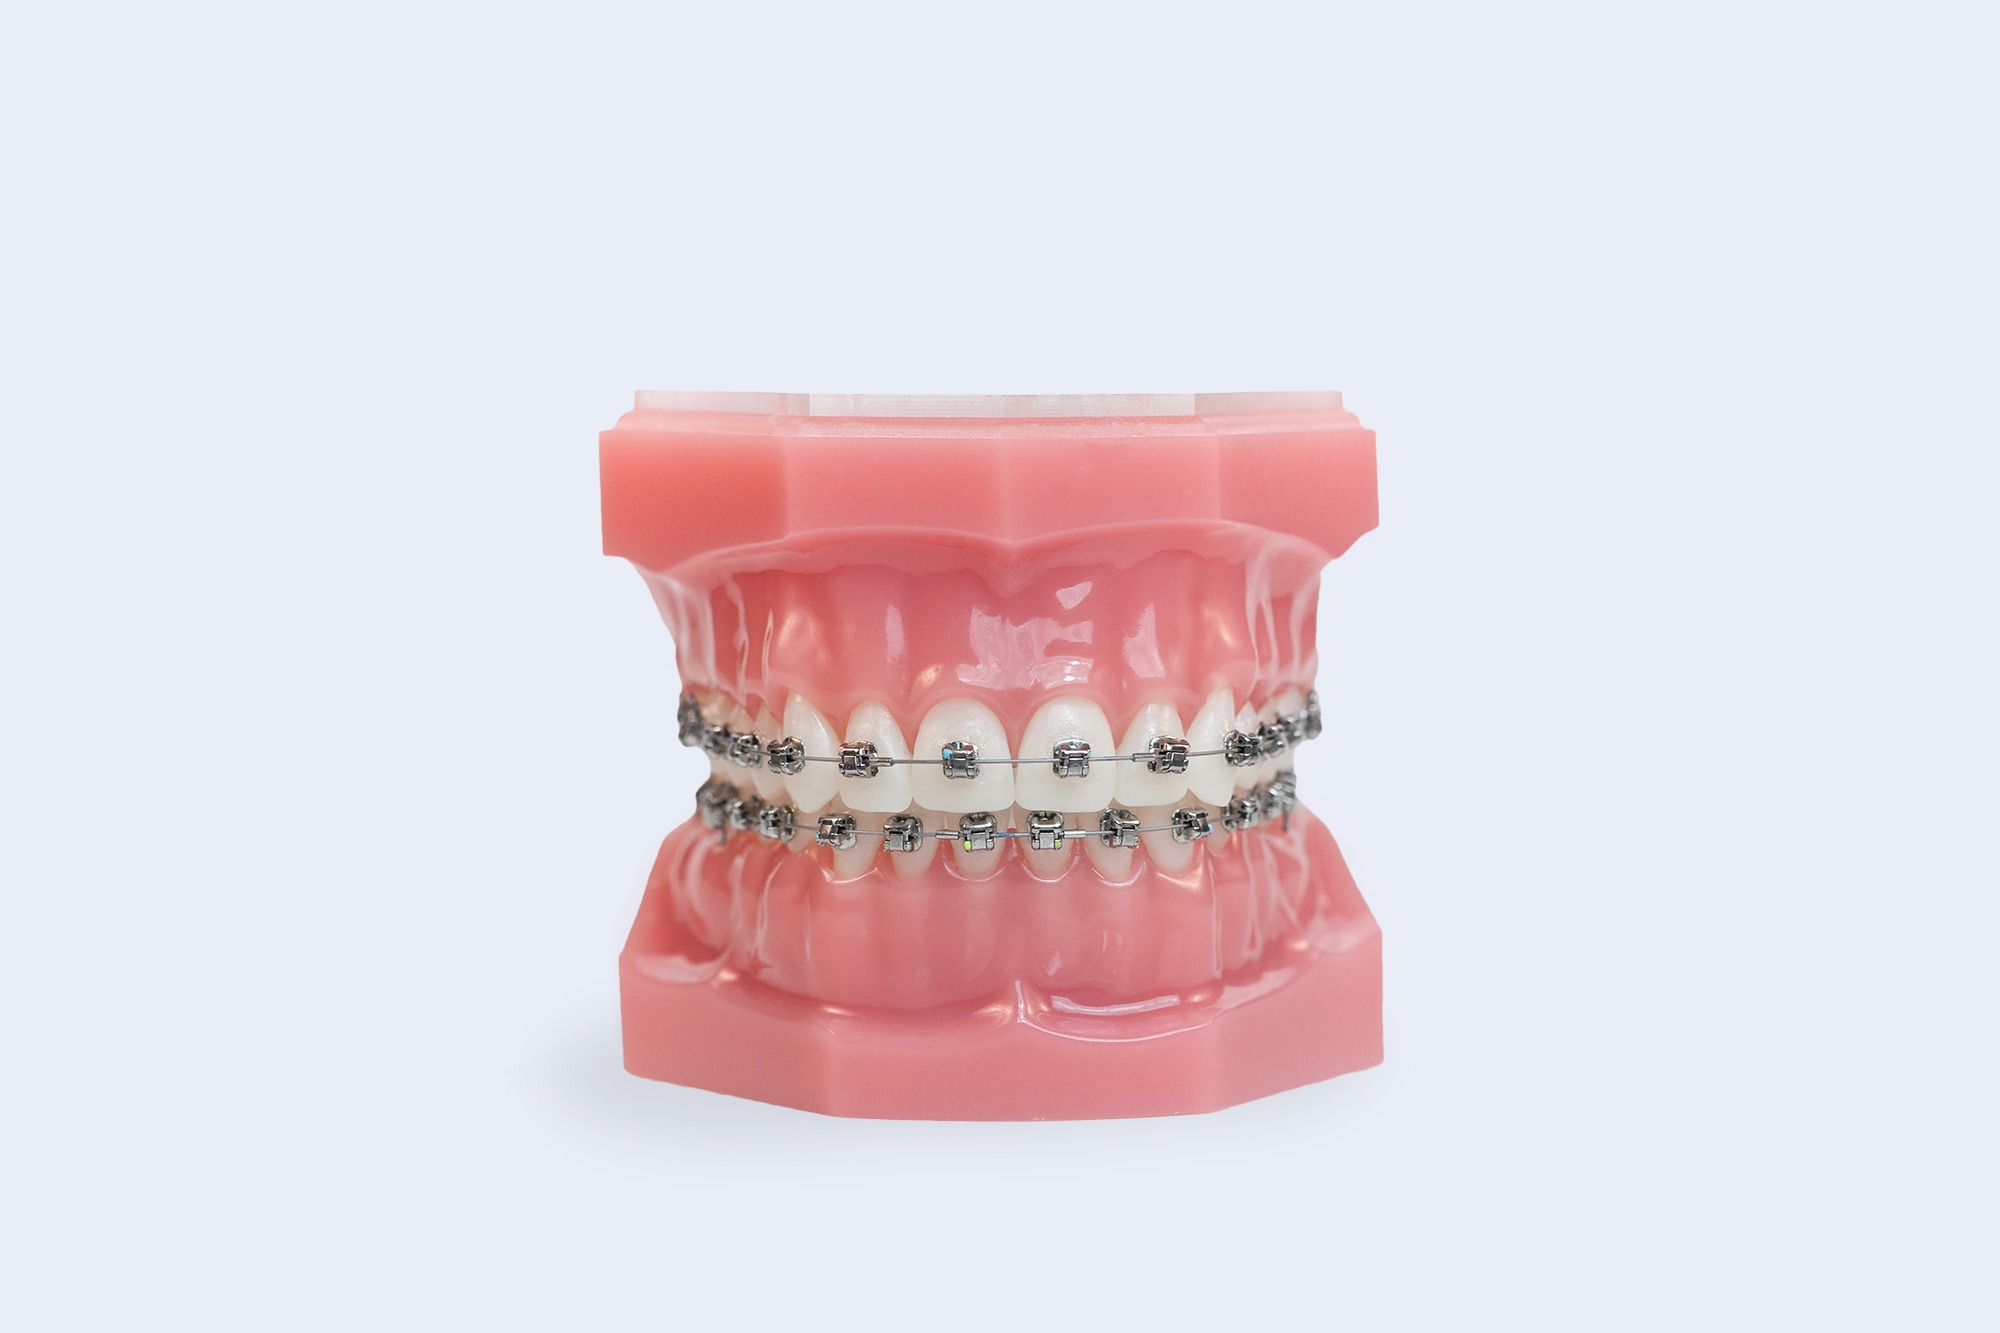 clear braces with purple bands